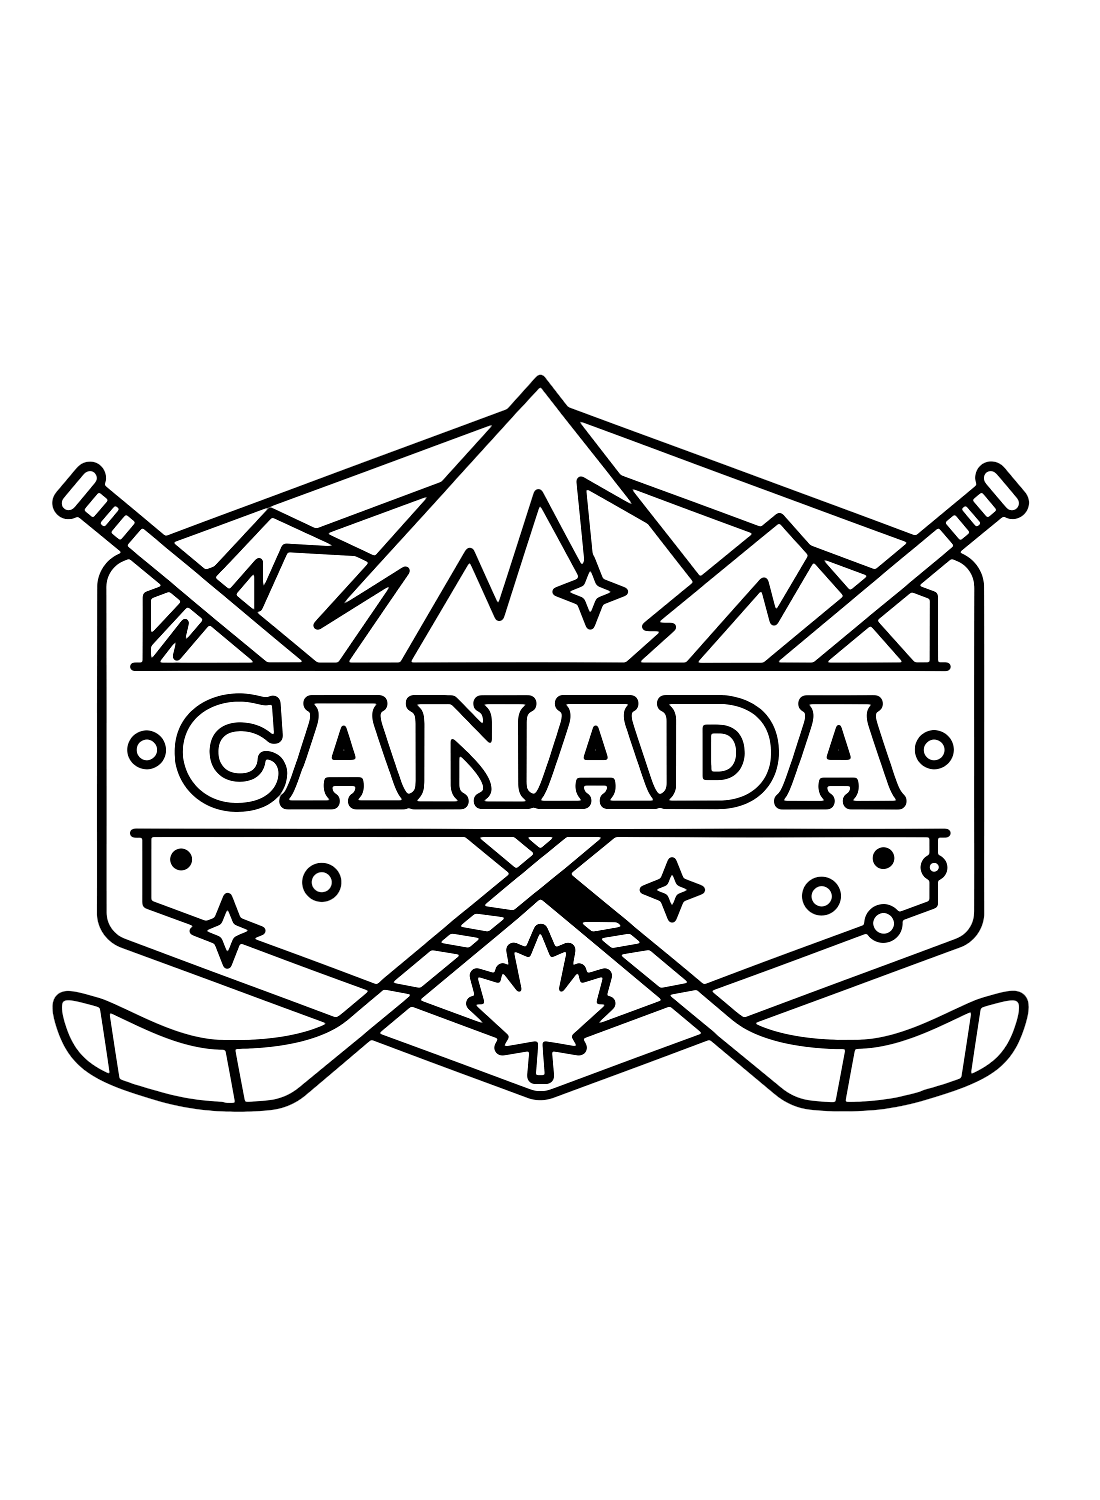 Country Canada Sticker Coloring Page